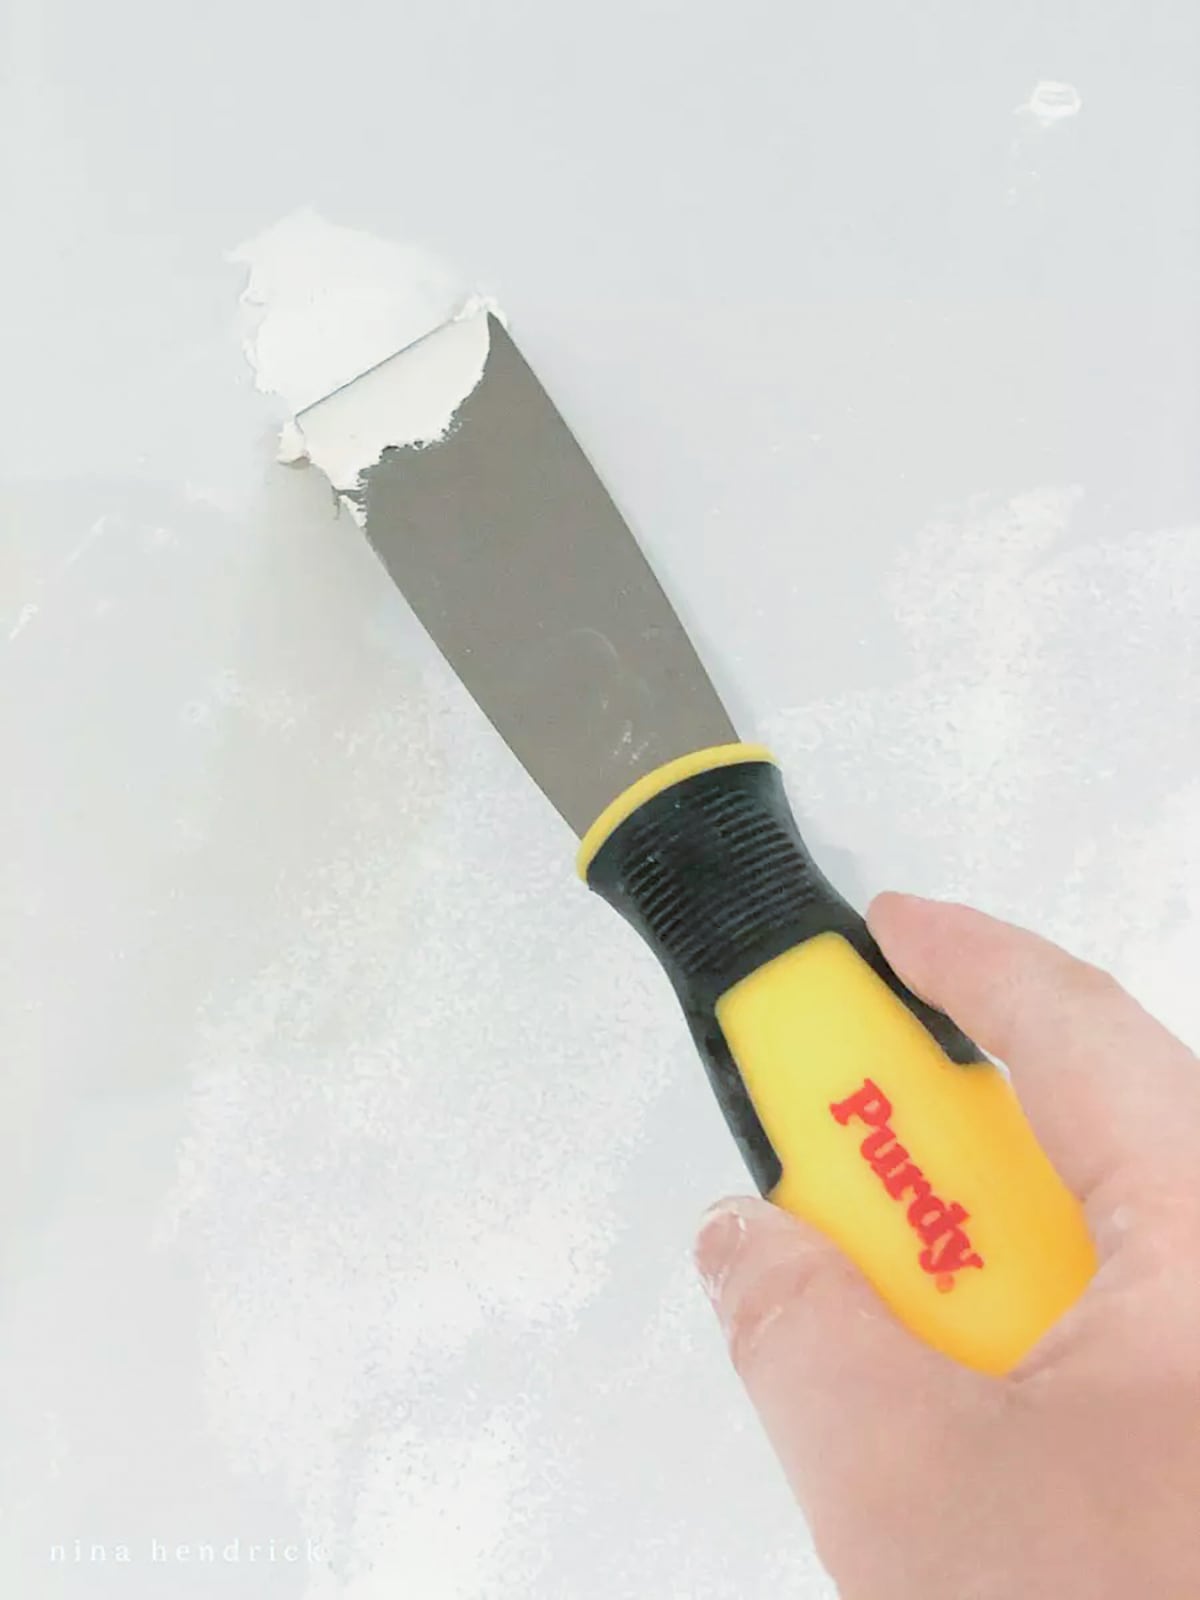 A person using a yellow and black painter's knife to repair a wall